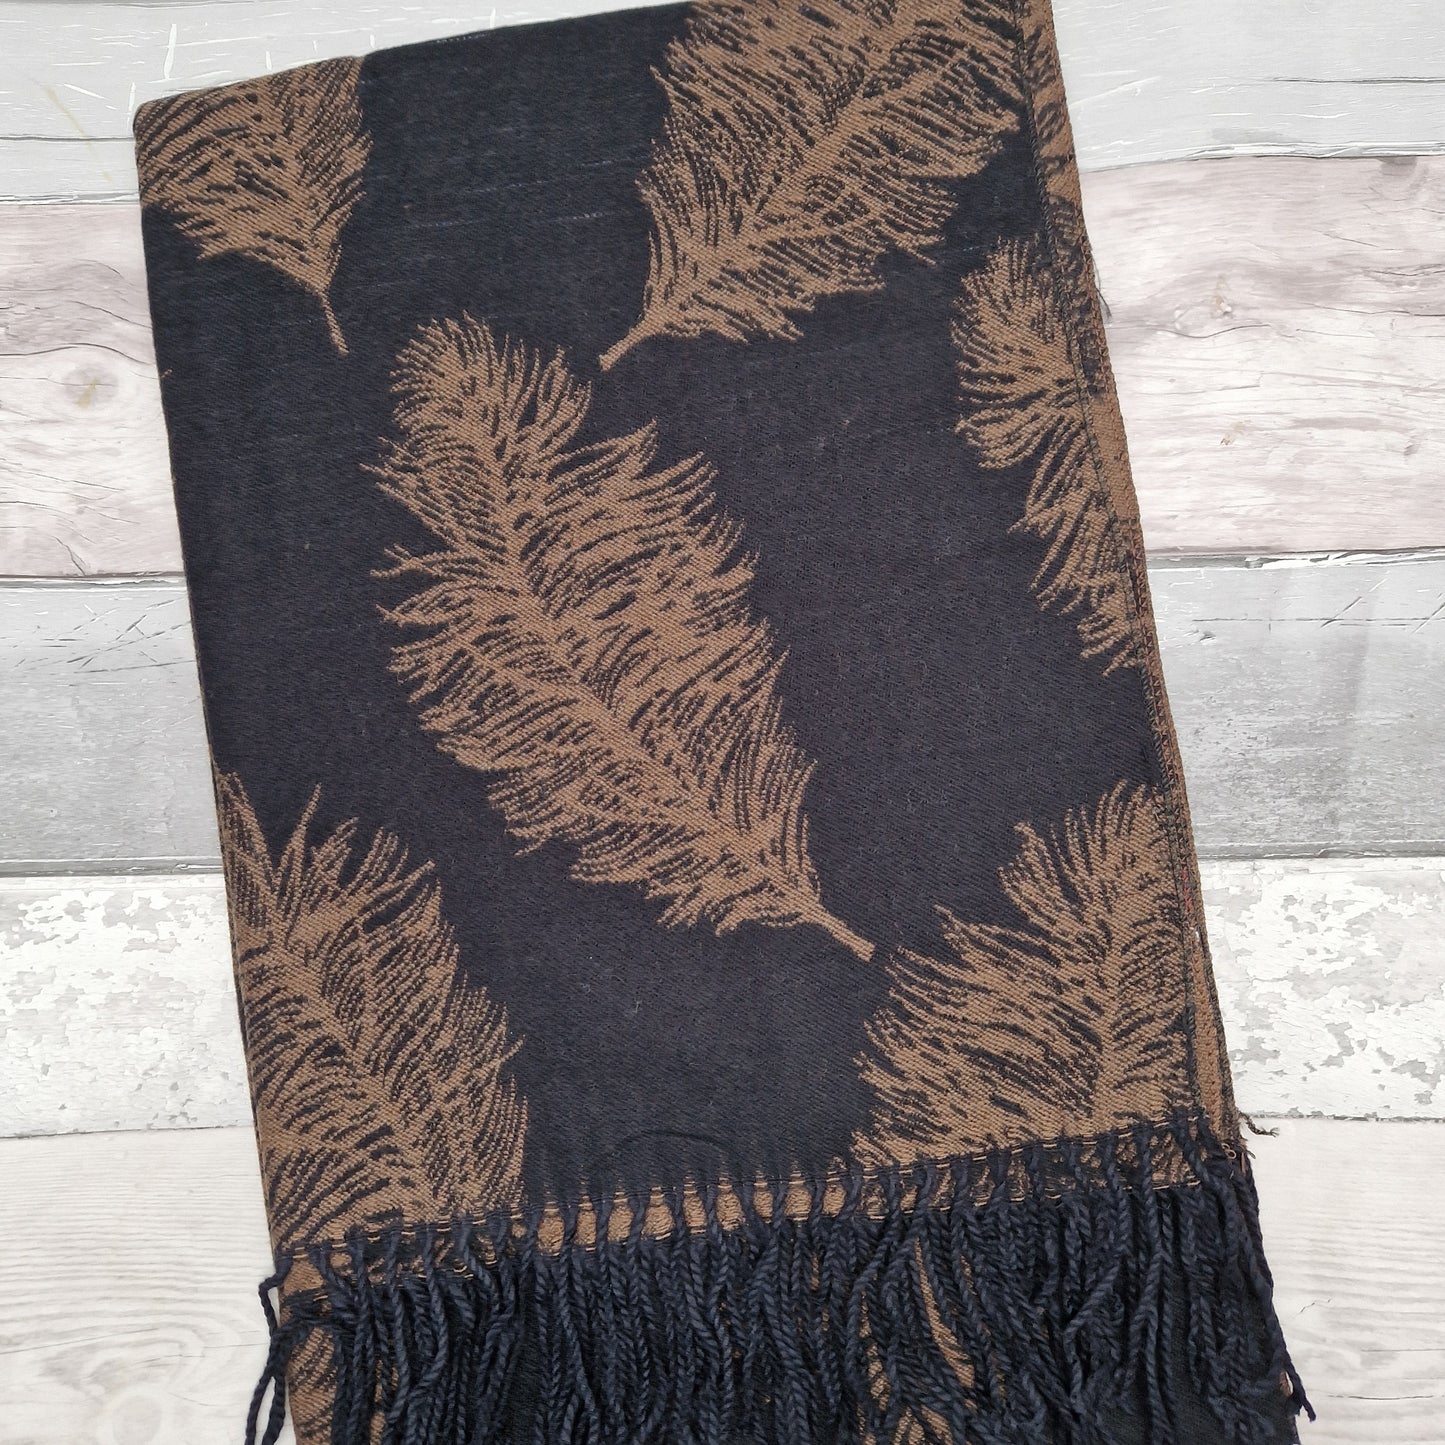 Black and brown feather print scarf.